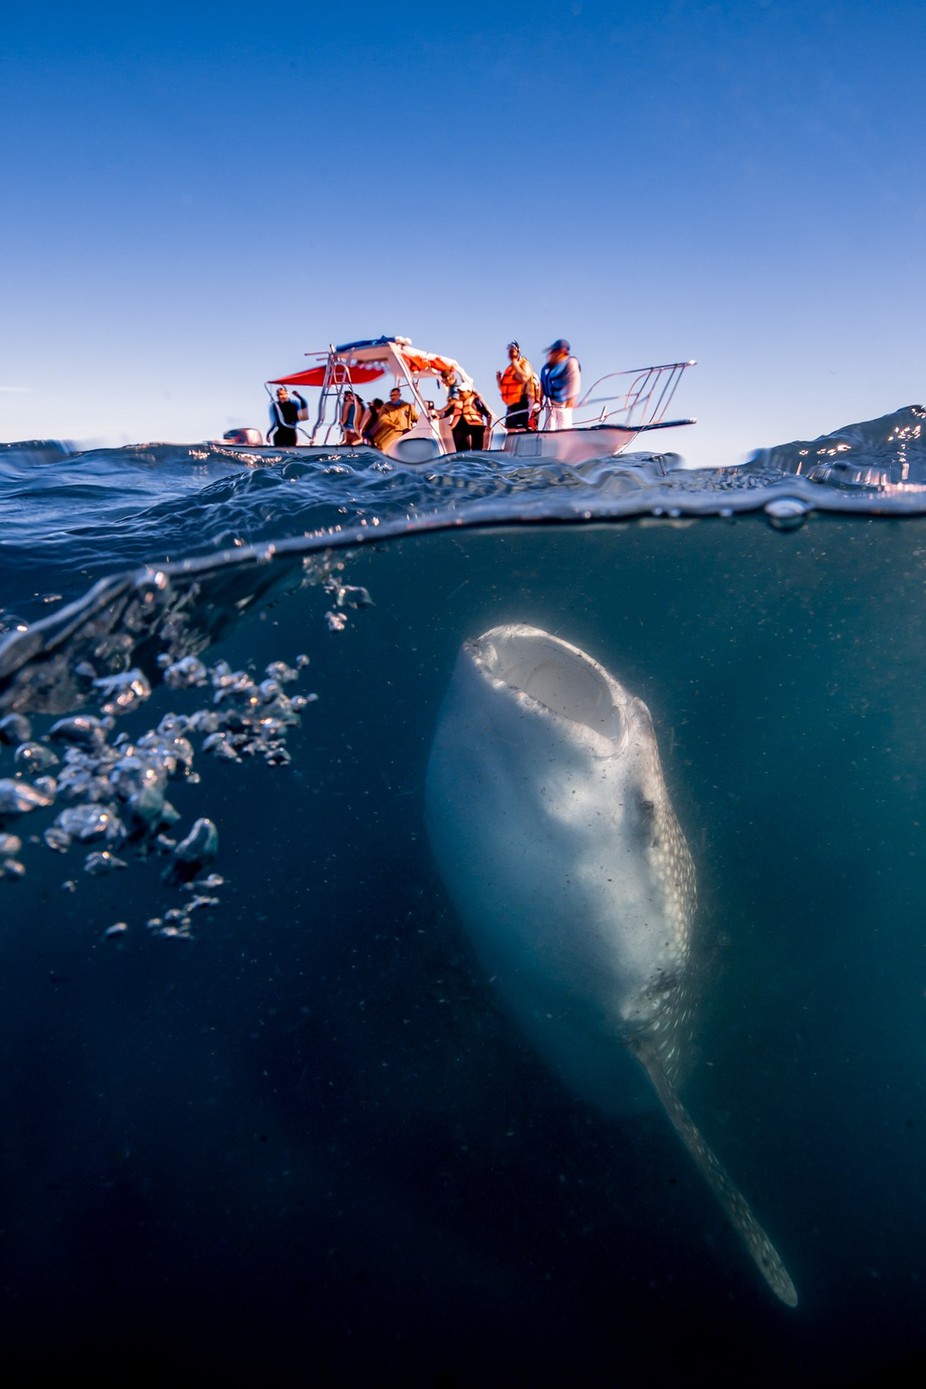 Whale shark under the boat by carlosgrillo - I Coexist Photo Contest